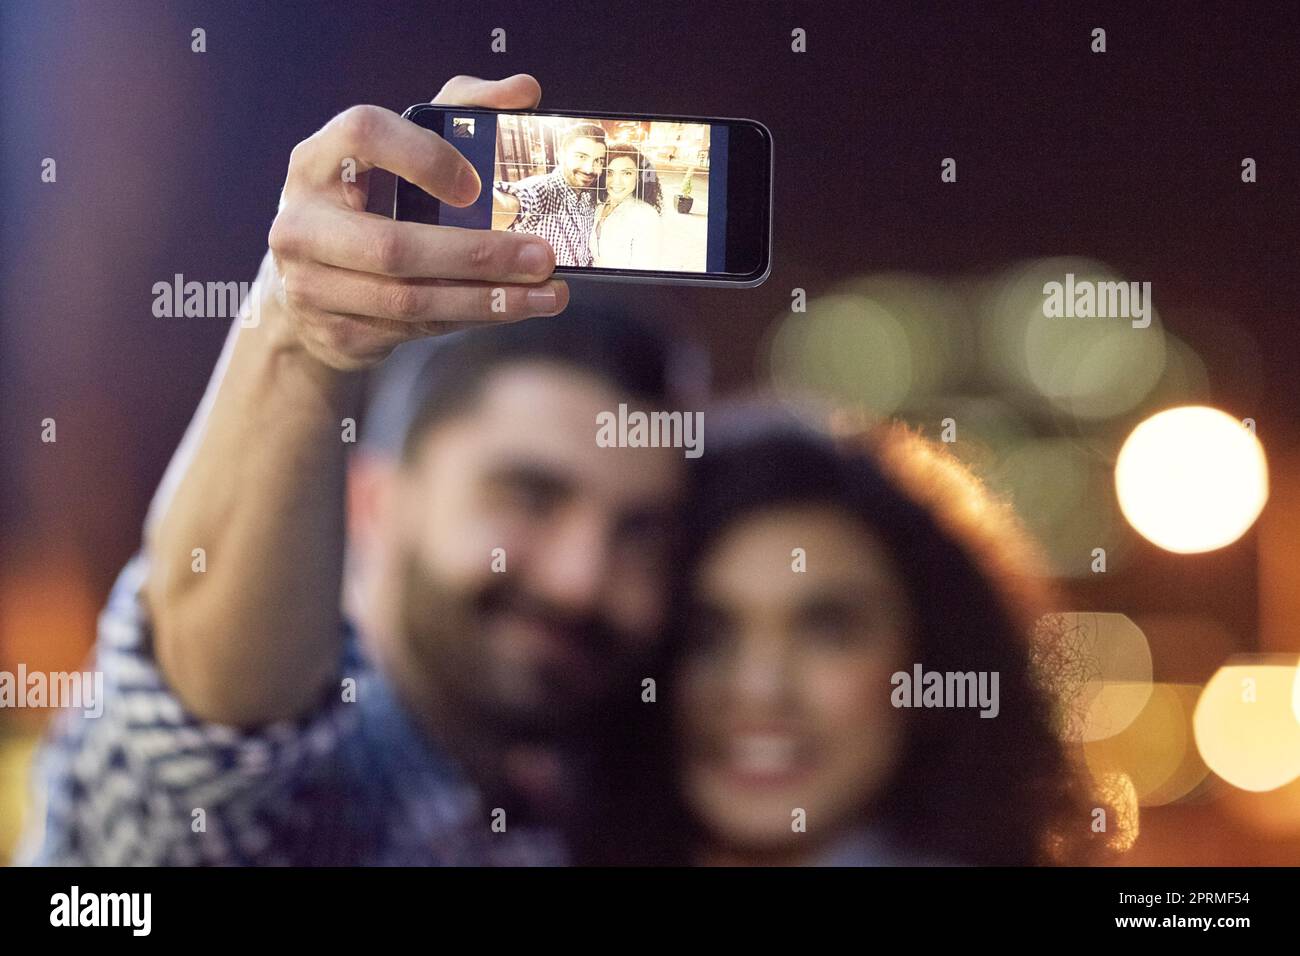 Making it a night to remember. an affectionate young couple taking a selfie while out on a date in the city. Stock Photo